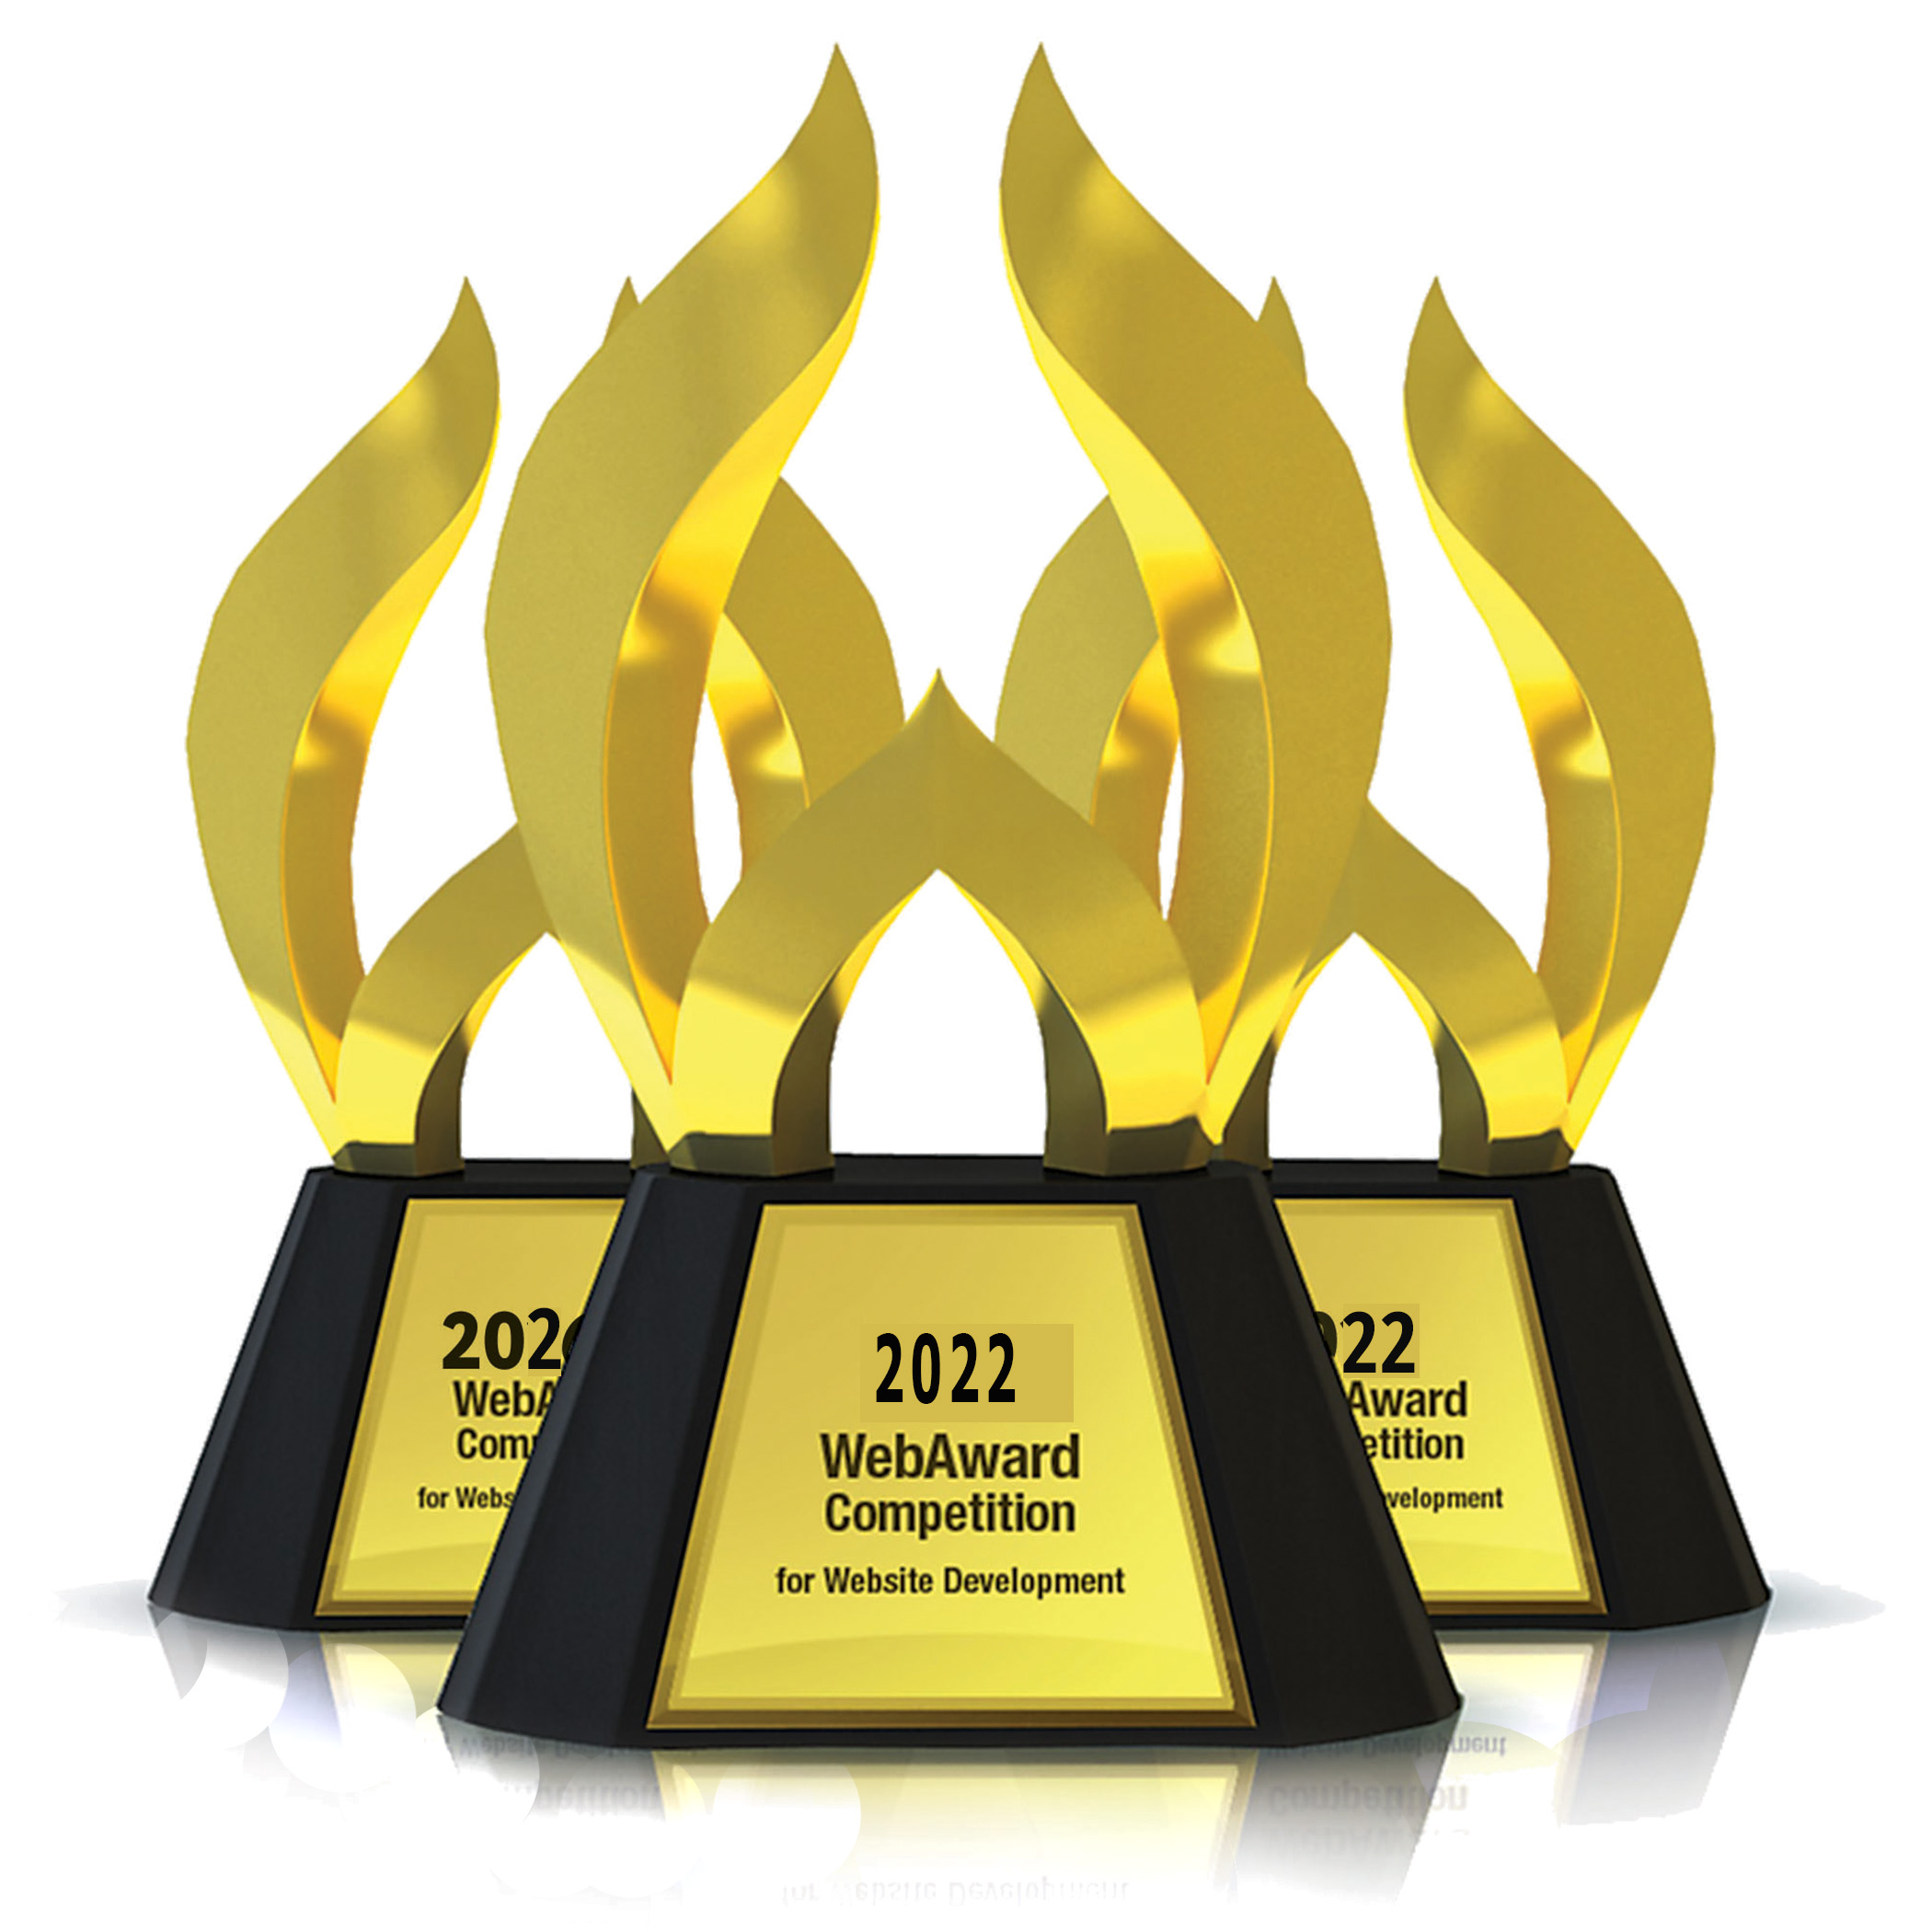 Best Financial Services Website to be Named by Web Marketing Association in 26th Annual WebAward Competition